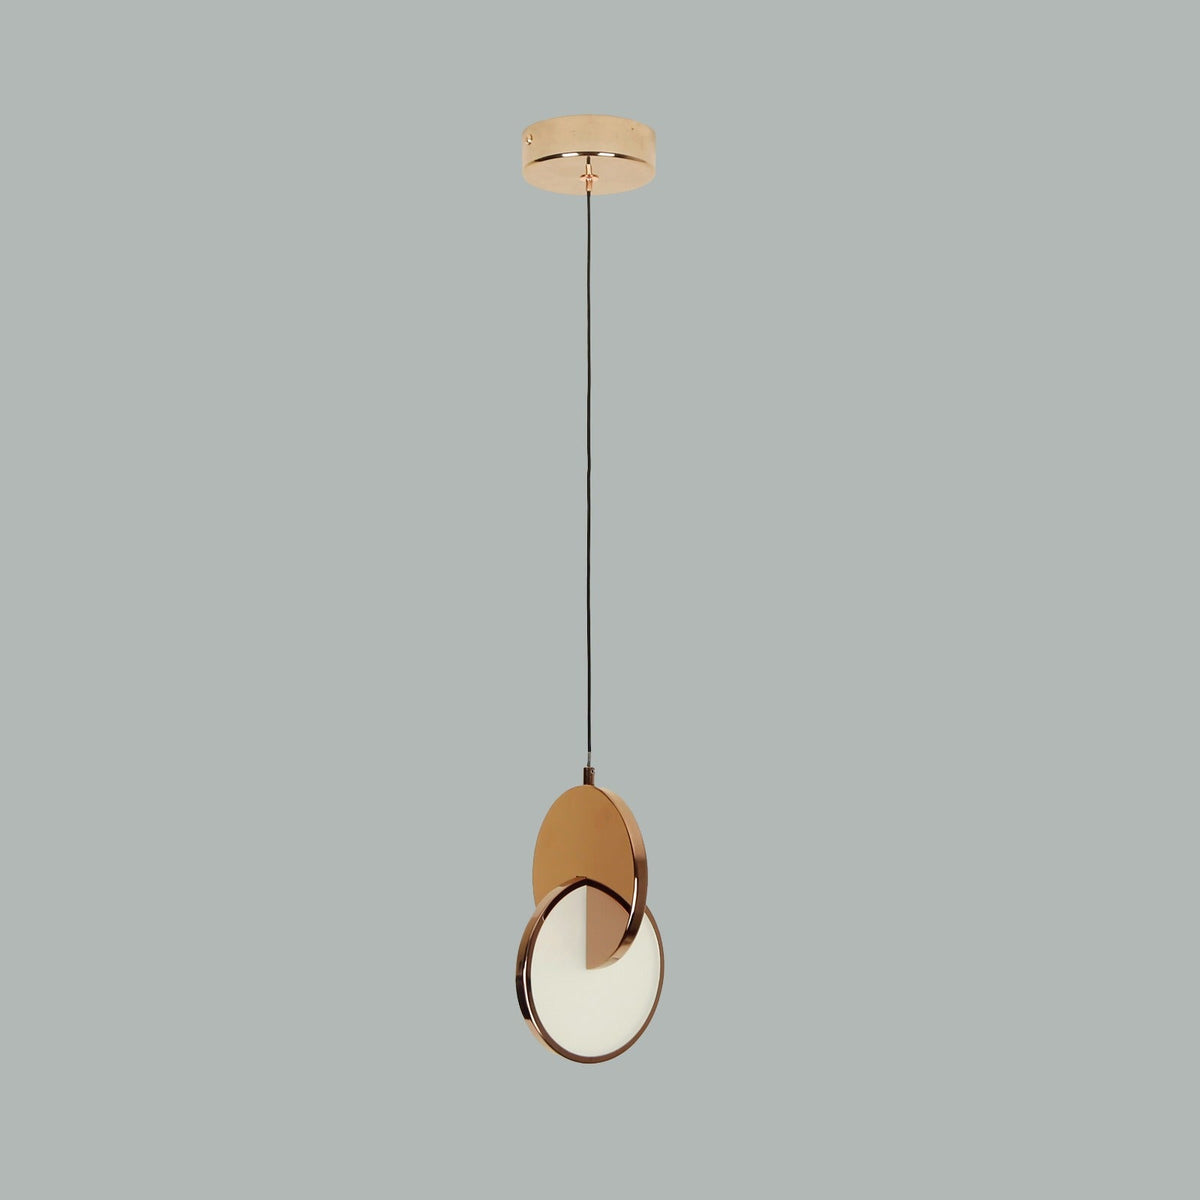 Up in the Air Rose Gold LED Pendant Light online